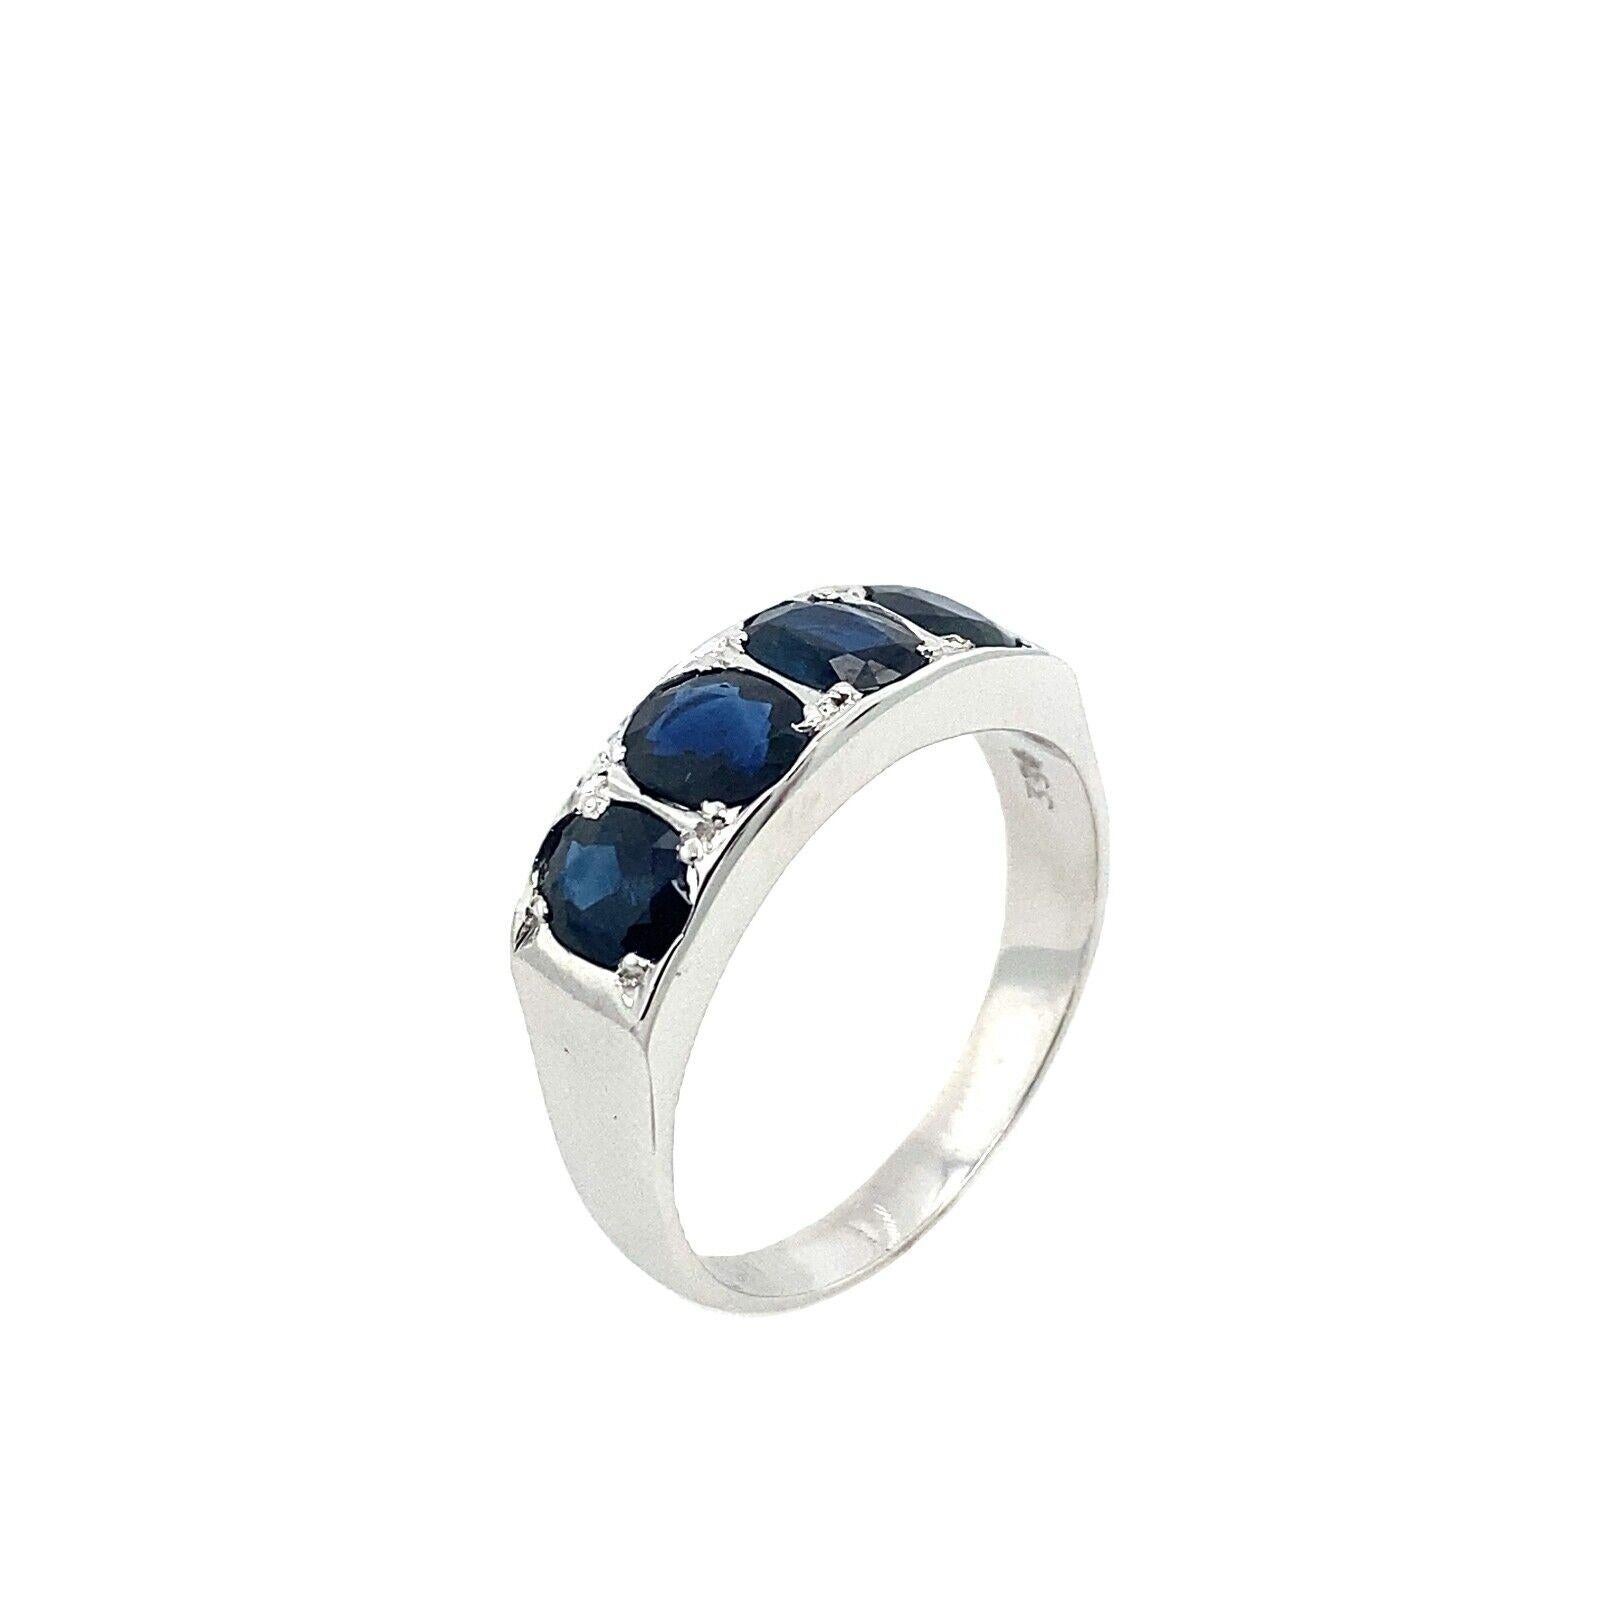 This 8ct white gold 4-stone ring set with oval natural sapphires. This ring is elegant and beautiful.

Additional Information:
Total Sapphires Weight: 2ct
Width of Band: 2.8mm
Width of Head: 6.2mm
Length of Head: 18mm
Total Weight: 4.6g
Ring Size: